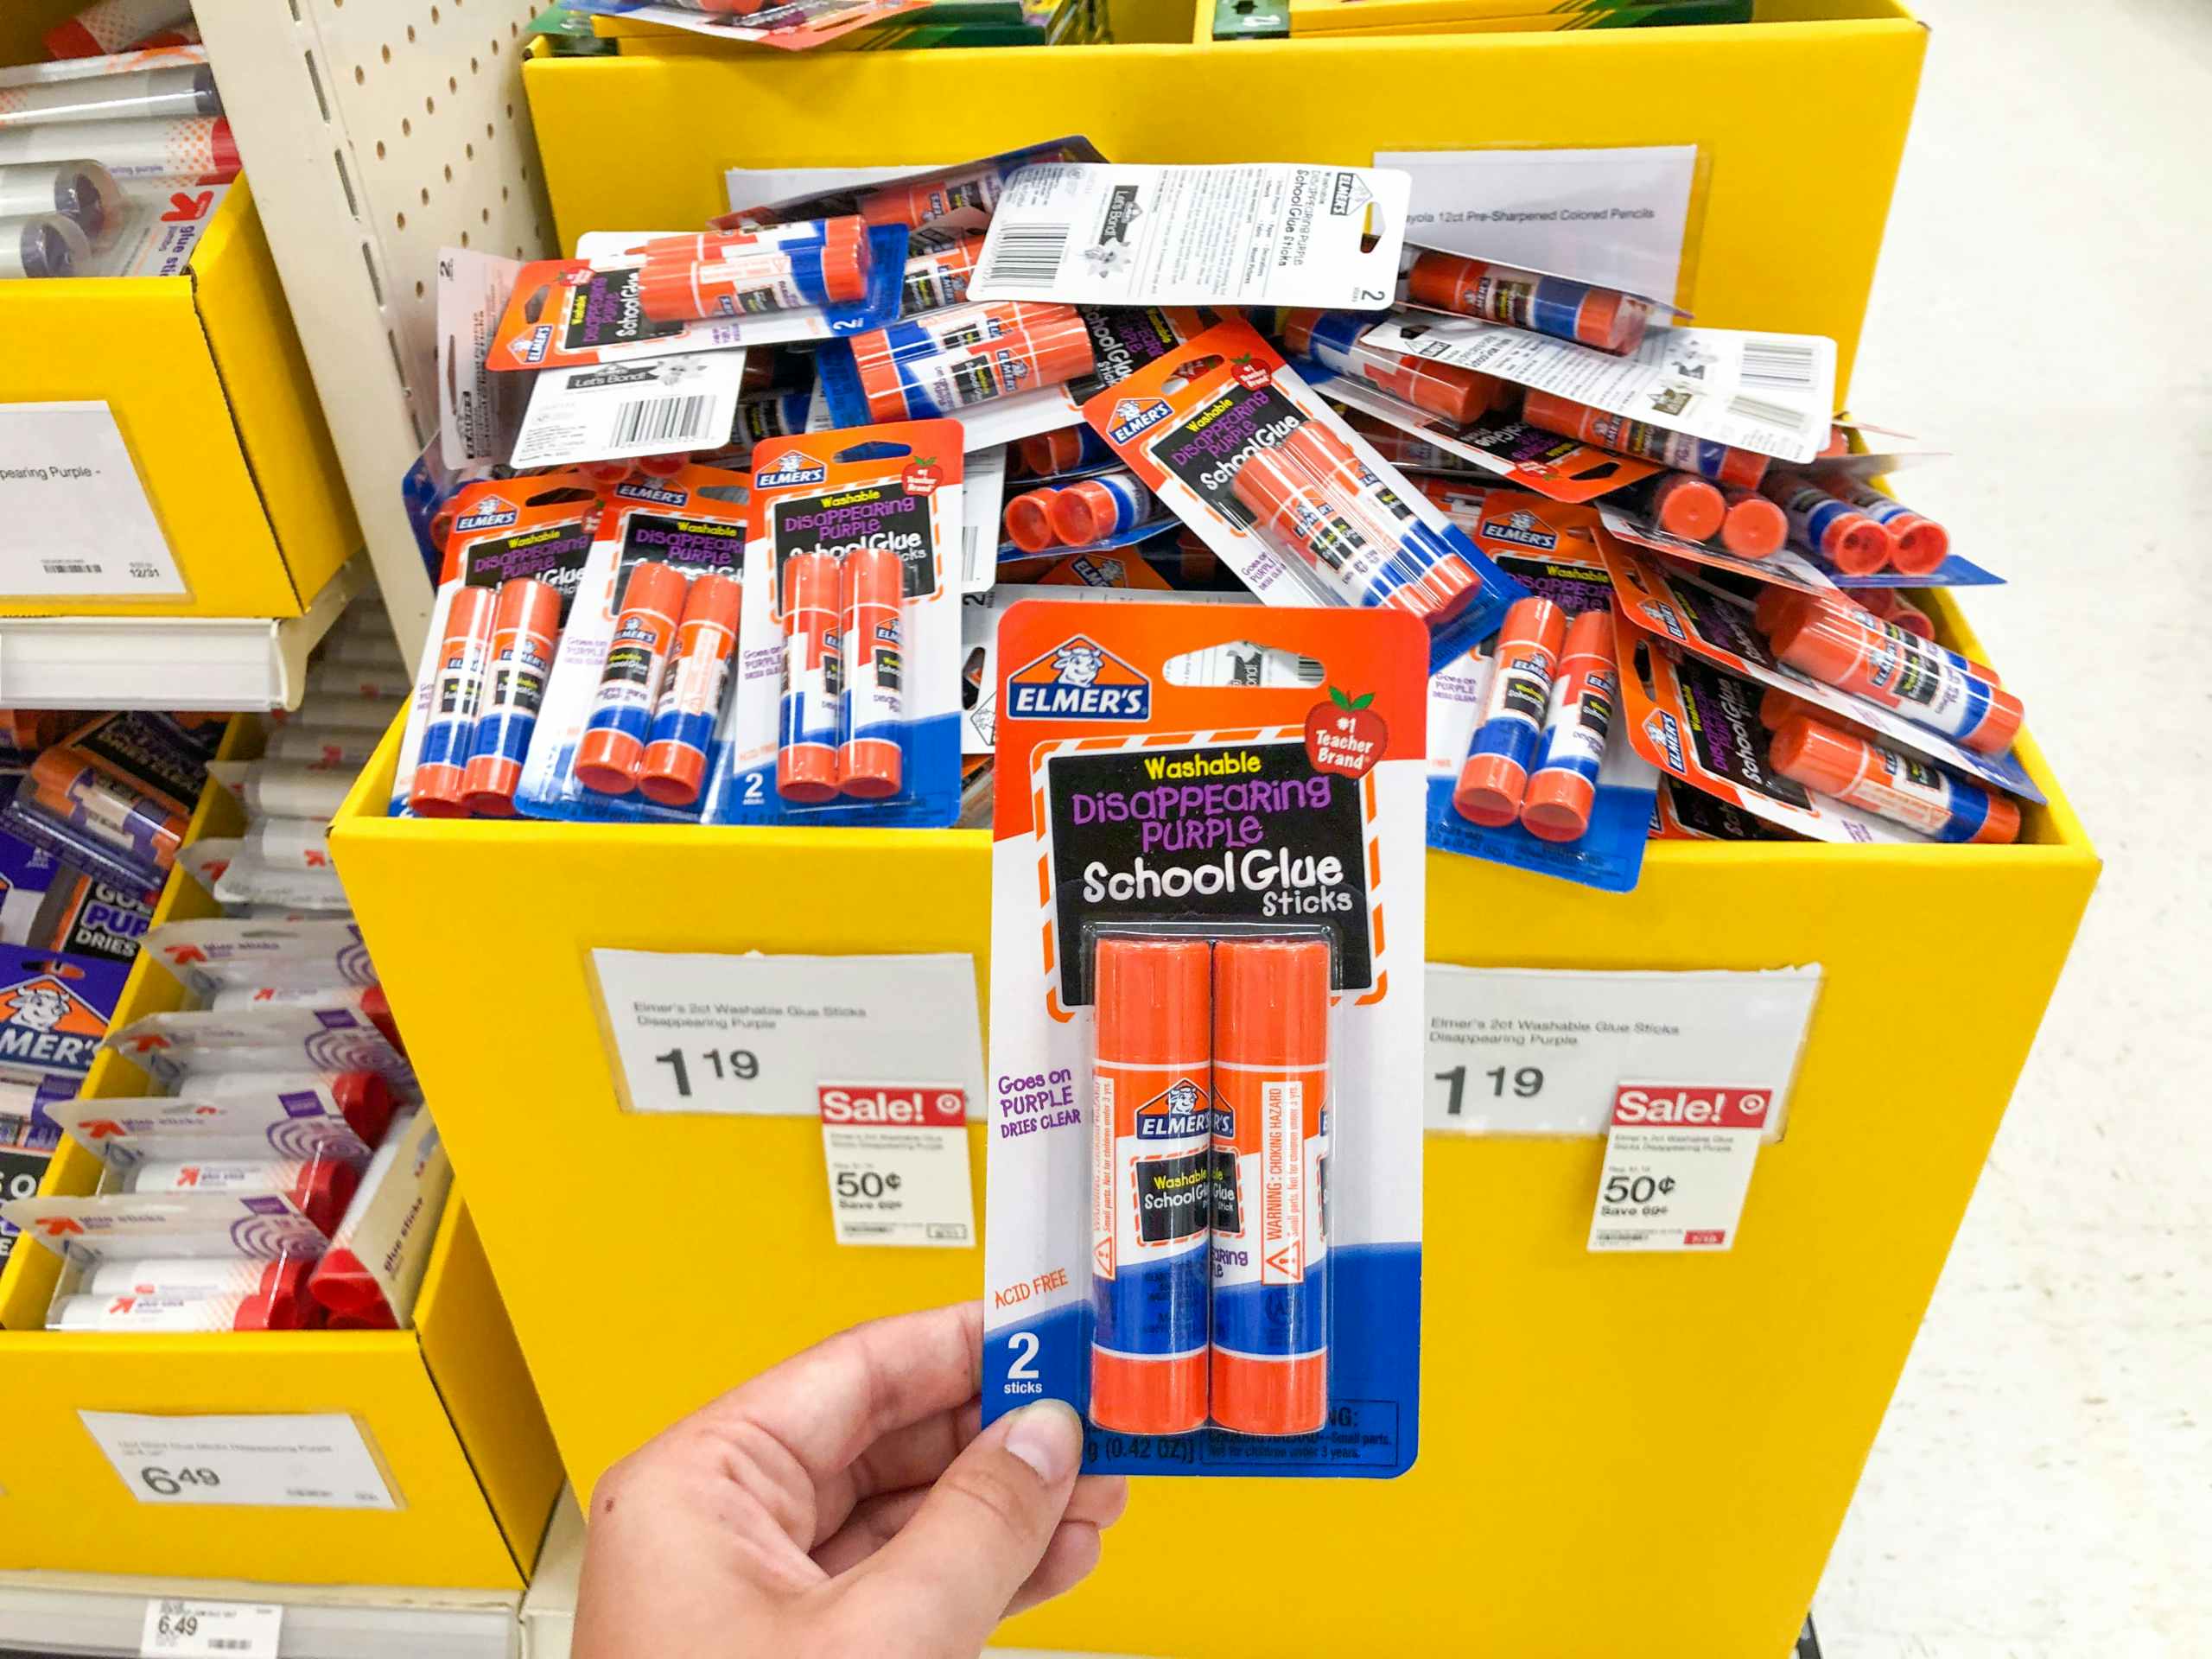 hand holding one package of glue sticks in front of $0.50 sale sign